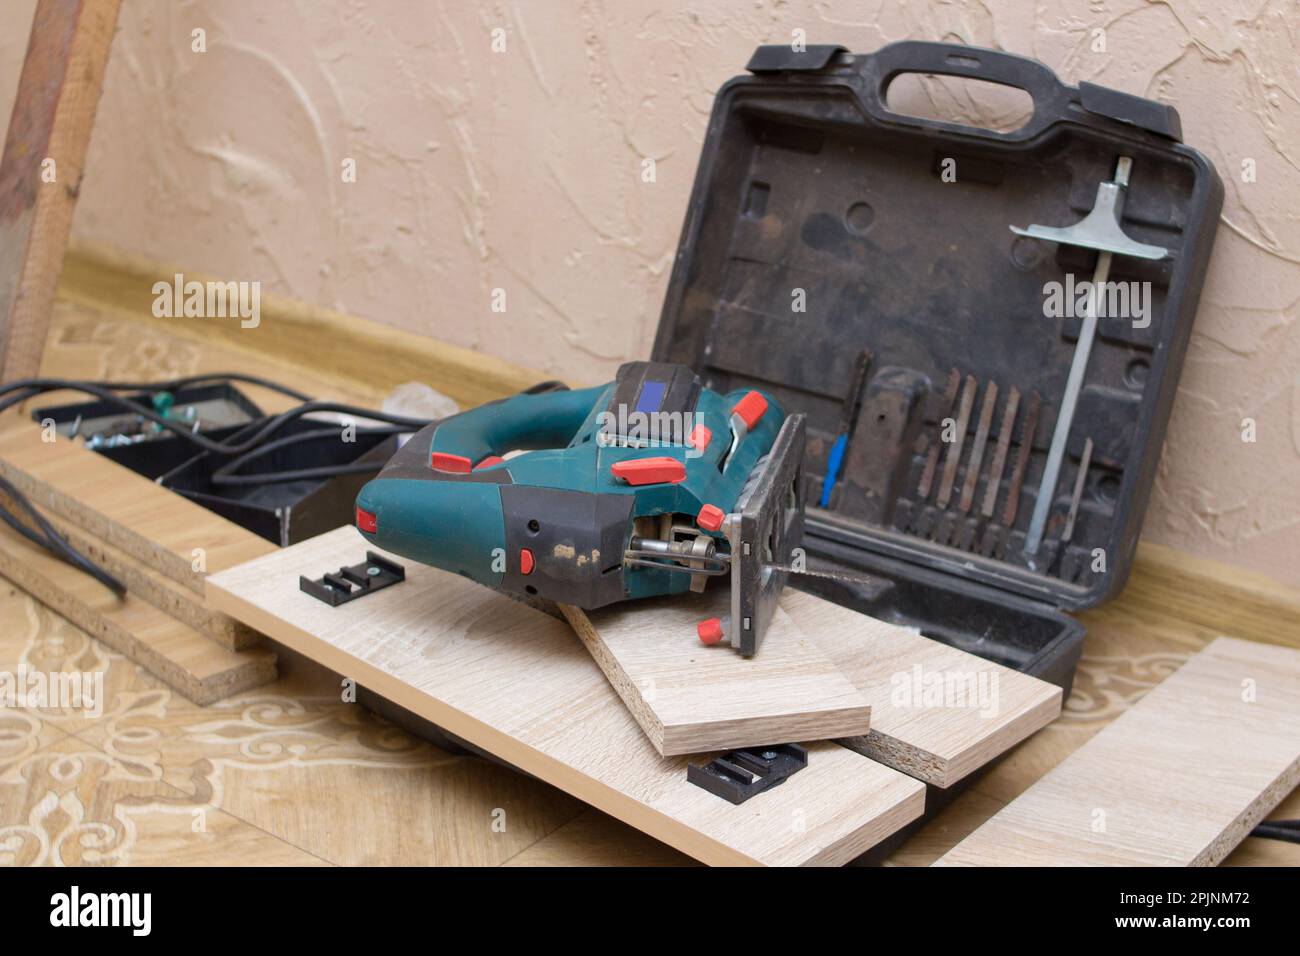 Lying on the floor is a joiner tool electric jig saw after cutting Stock Photo